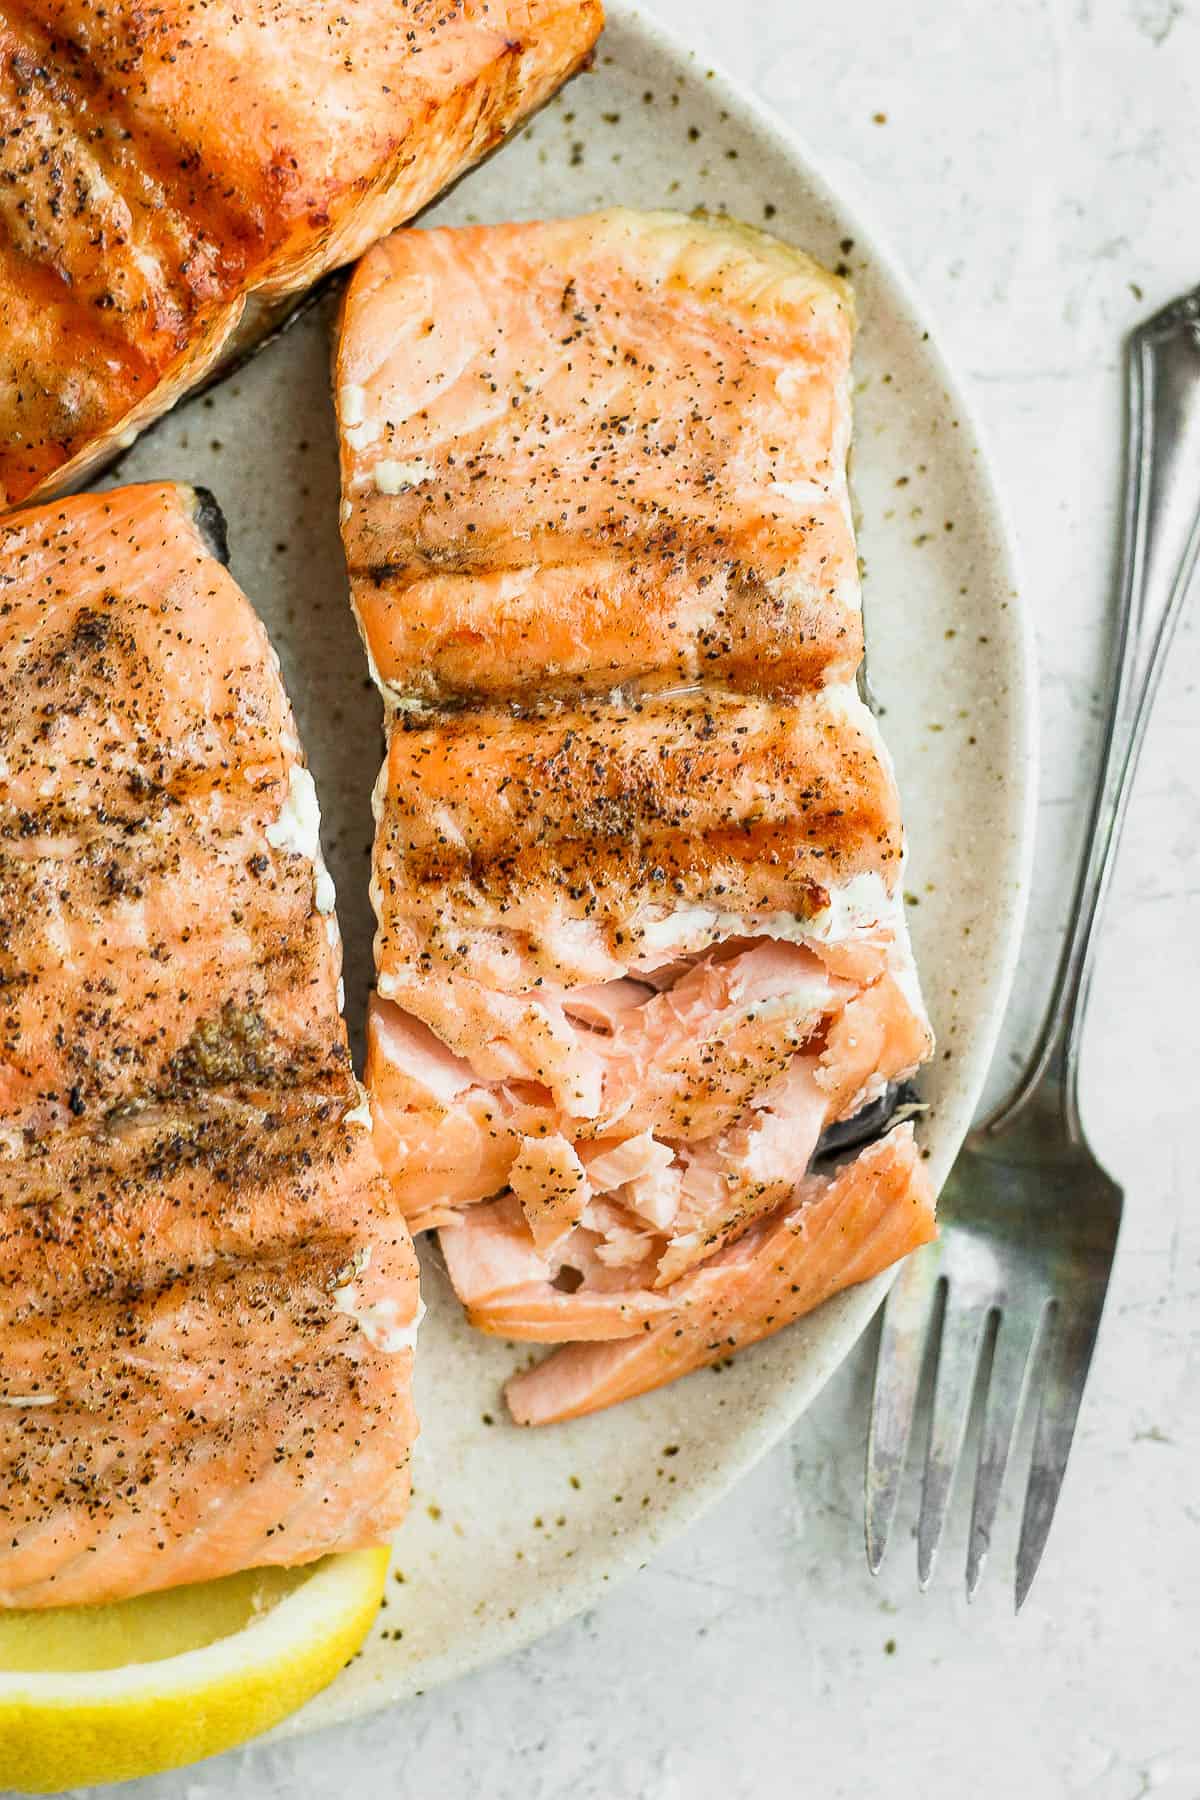 Grilled salmon fillets on plate with fork next to plate